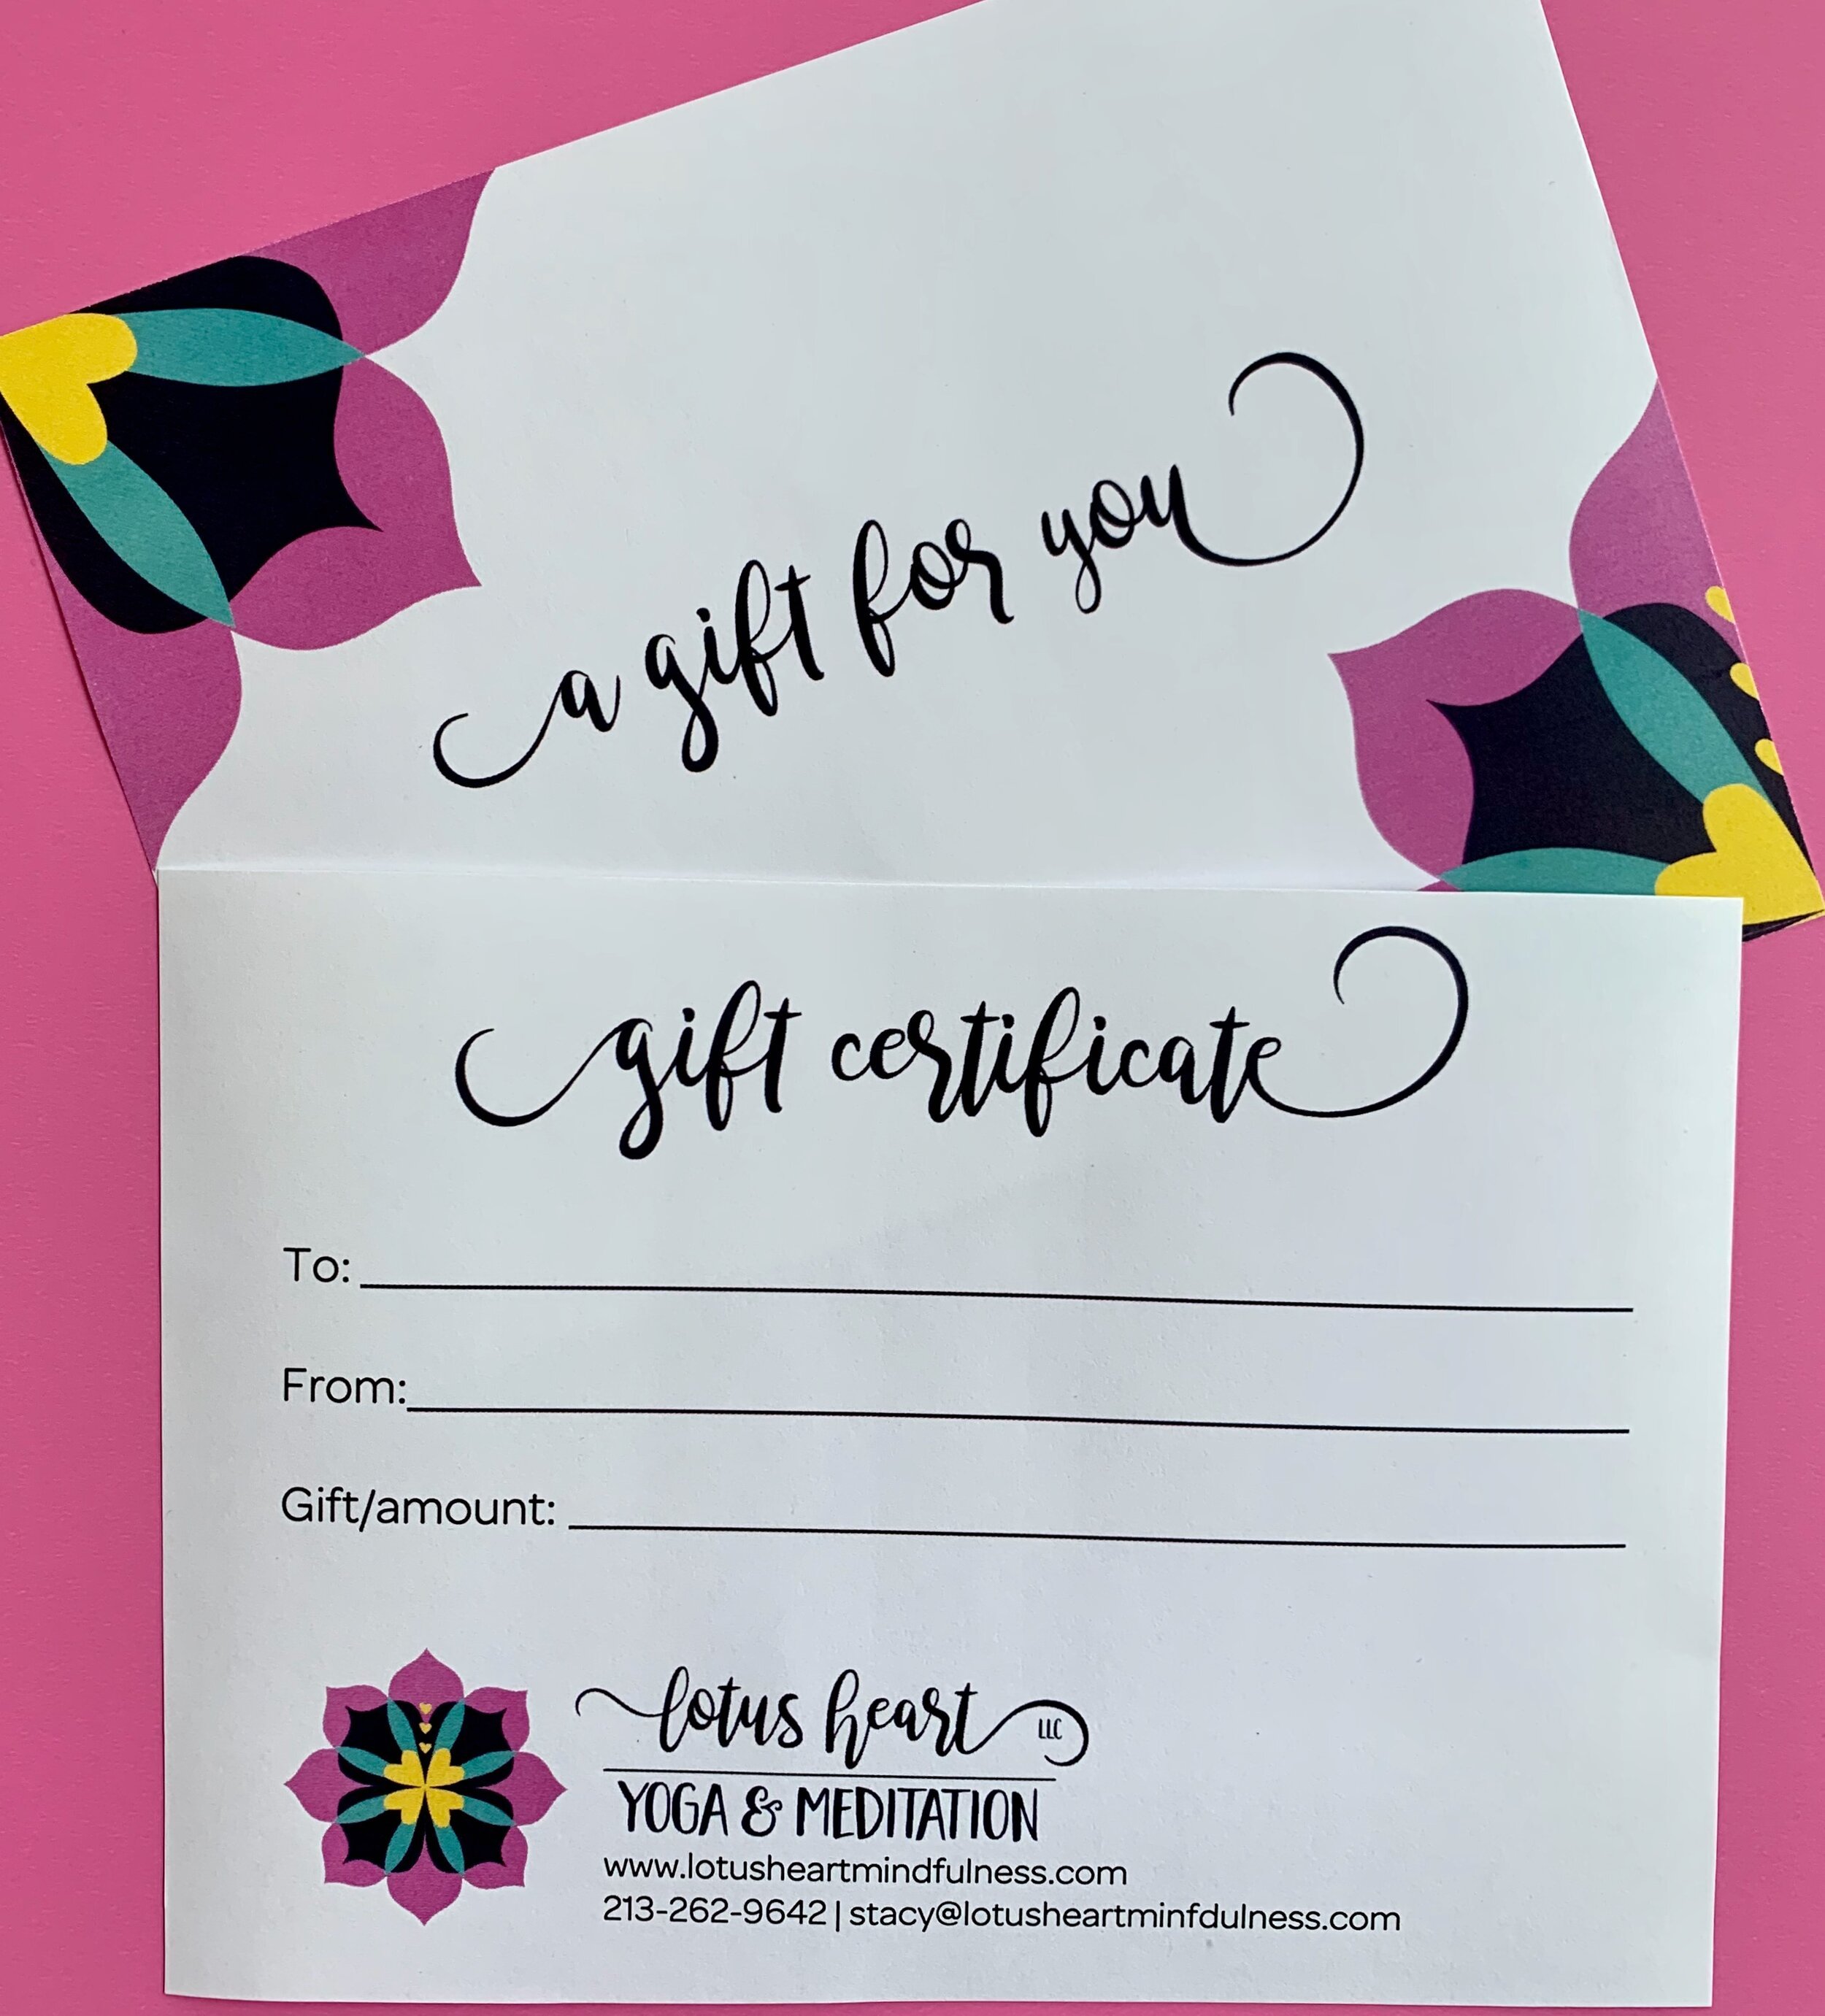 mindfulness gift certificate tampa